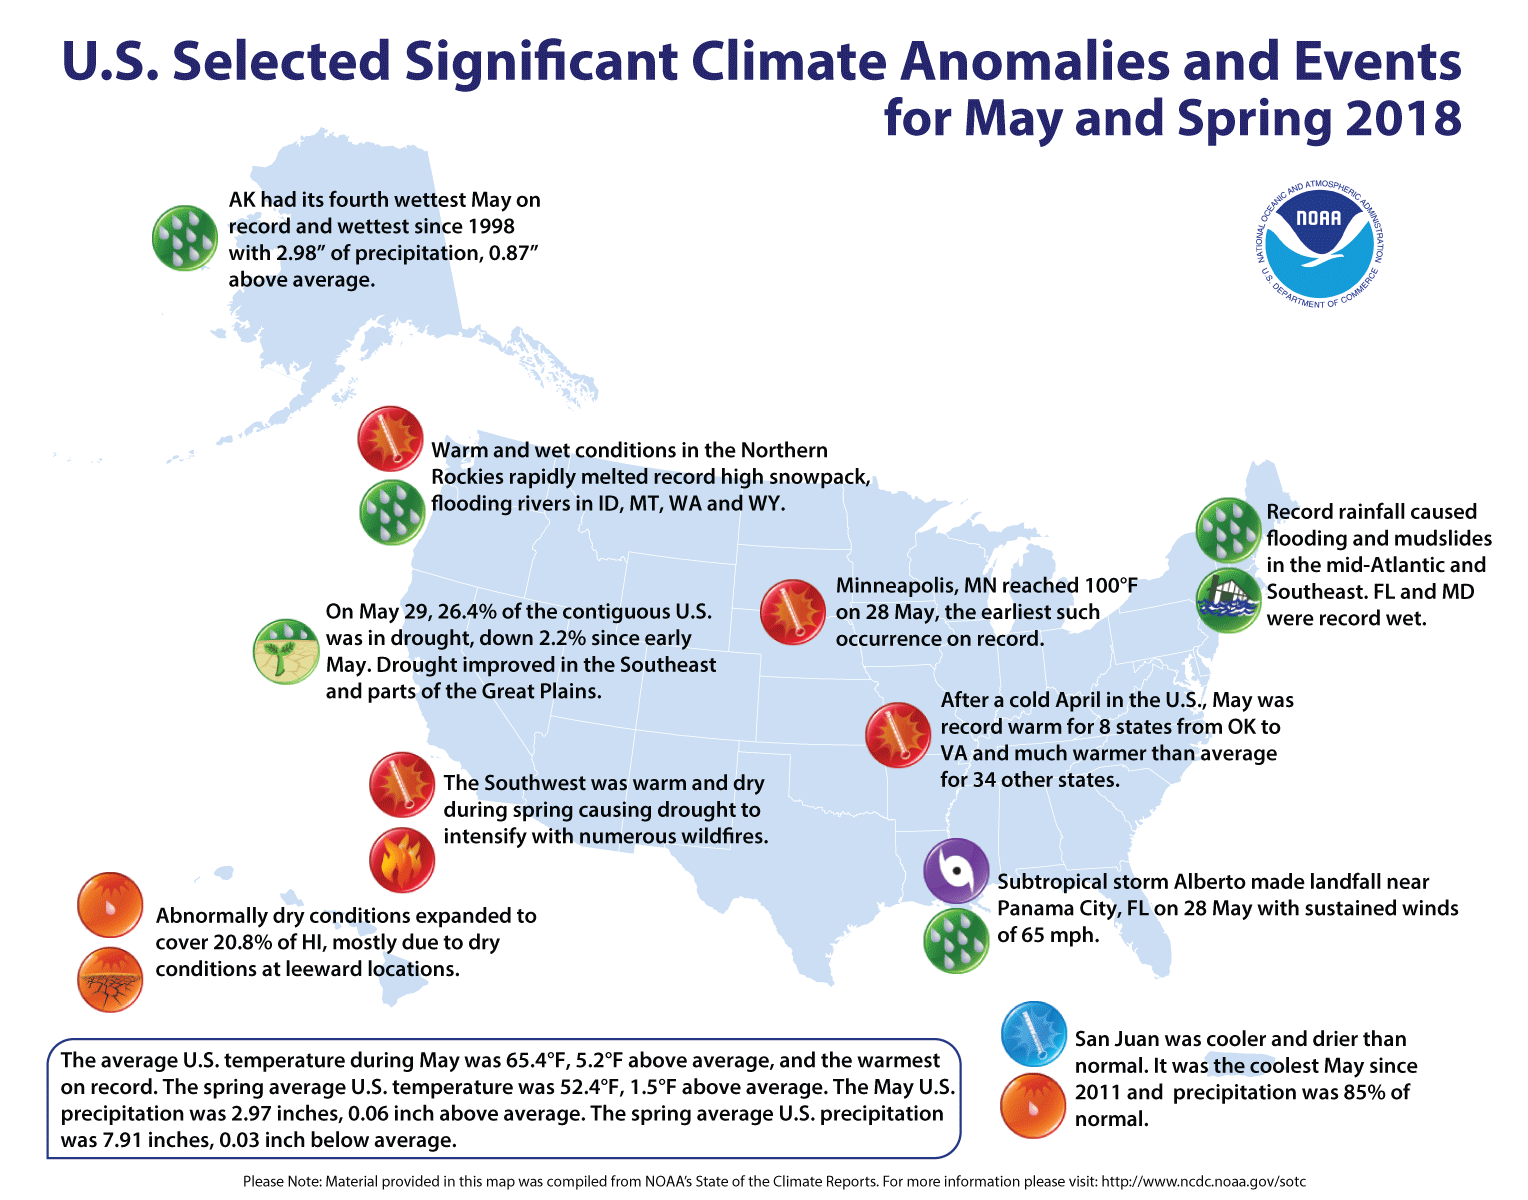 An annotated map of the U.S. showing other climate events that occurred in May 2018. For details, see the bulleted list below in our story.